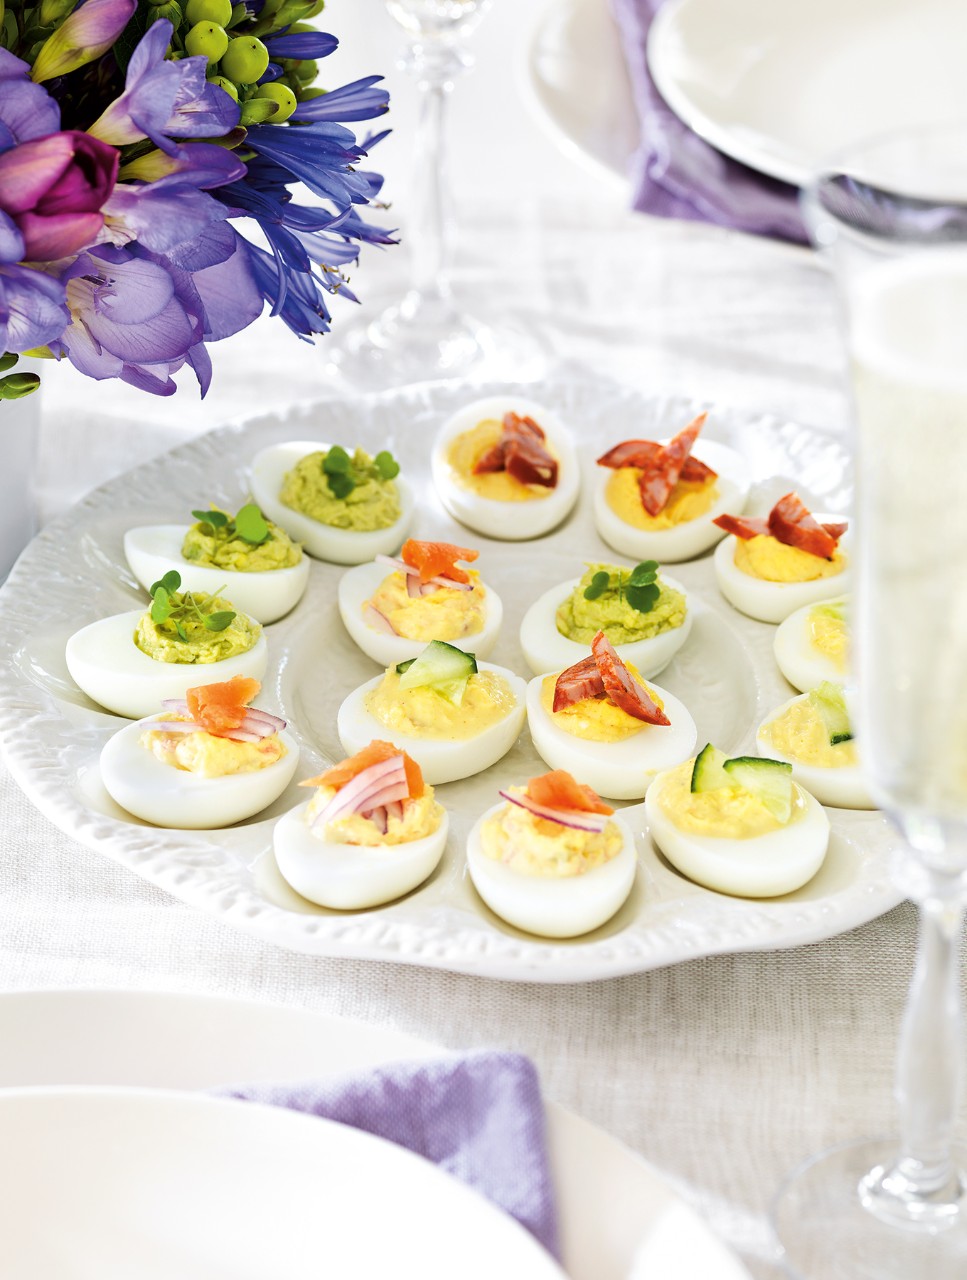 North, East, South & West Devilled Eggs